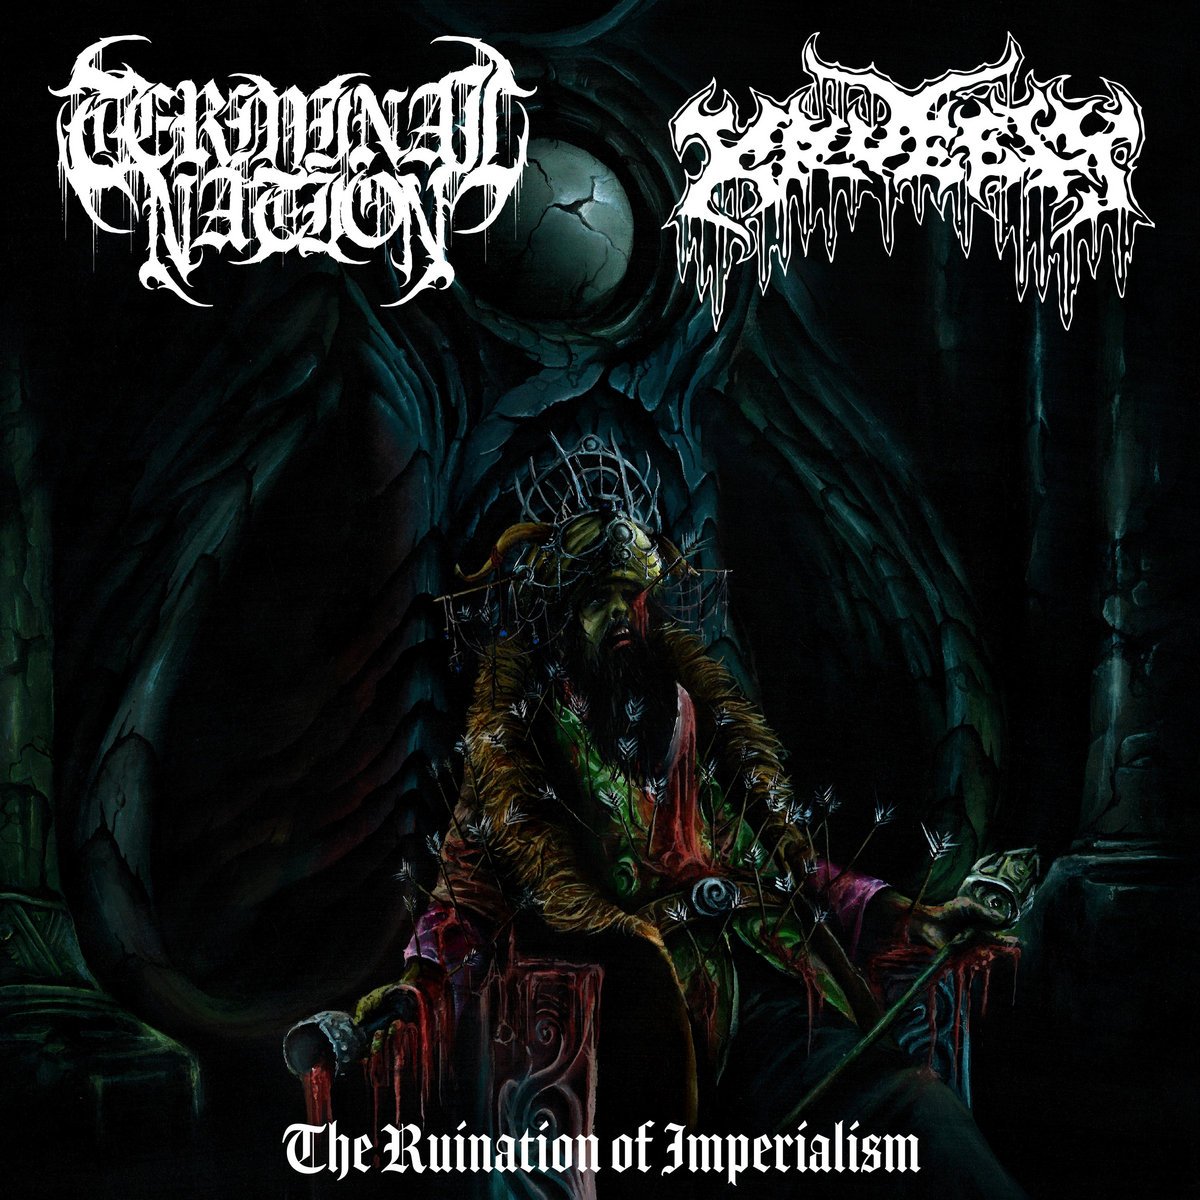 Terminal Nation/Kruelty – “The Ruination of Imperialism”